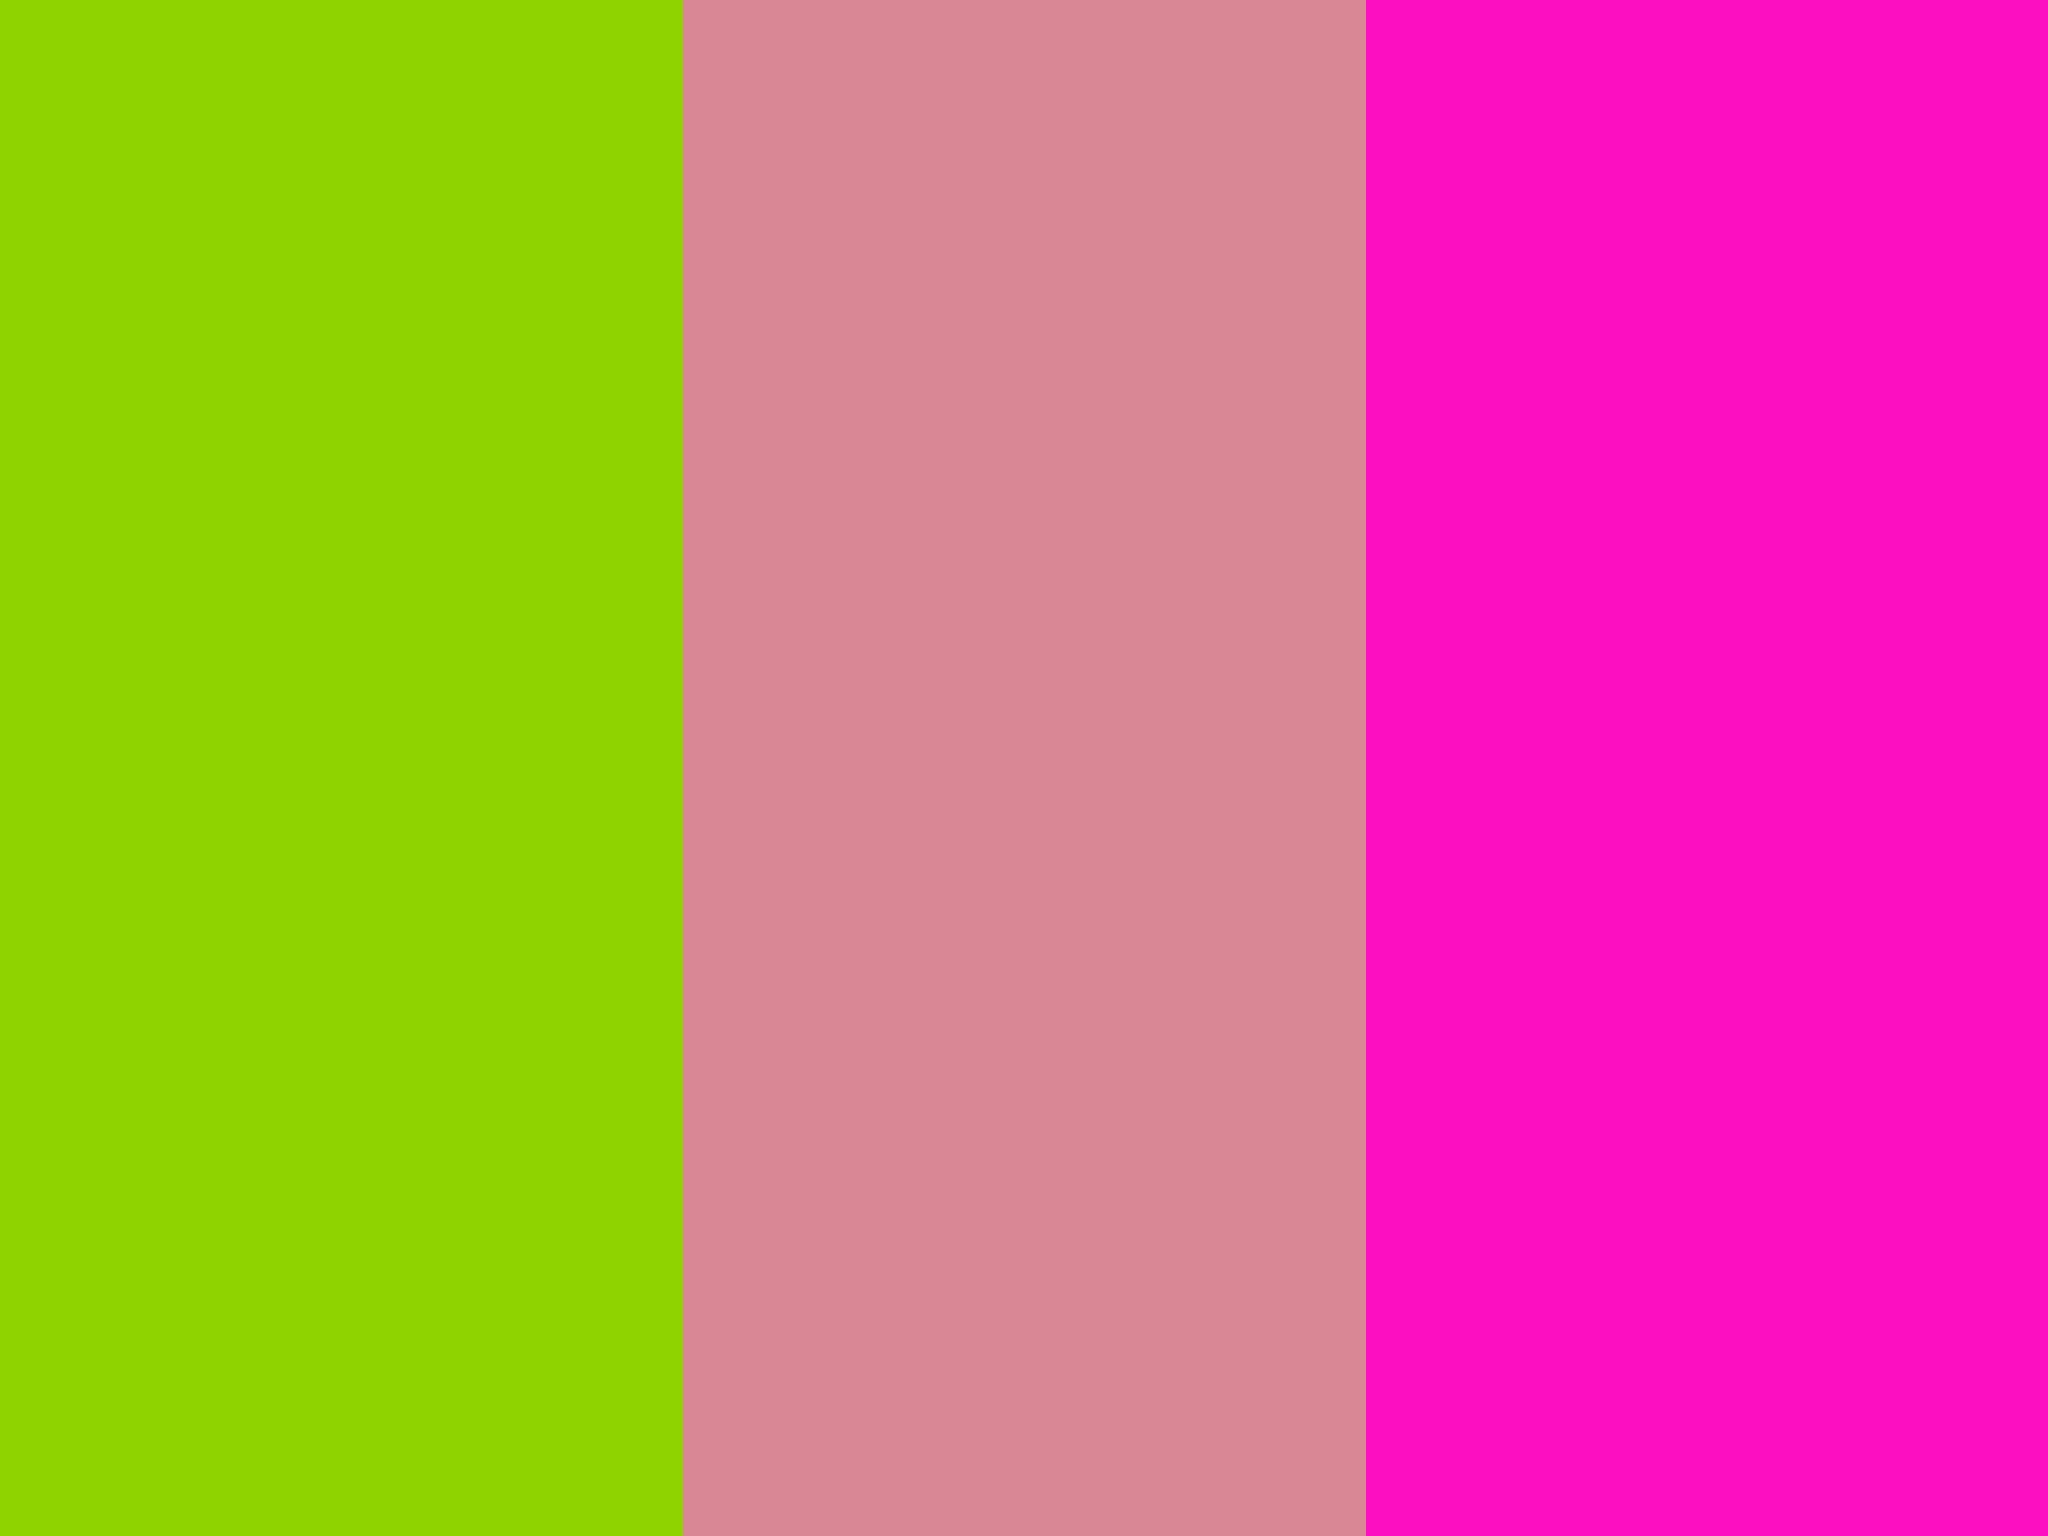  Sheen Green Shimmering Blush and Shocking Pink Three Color Background